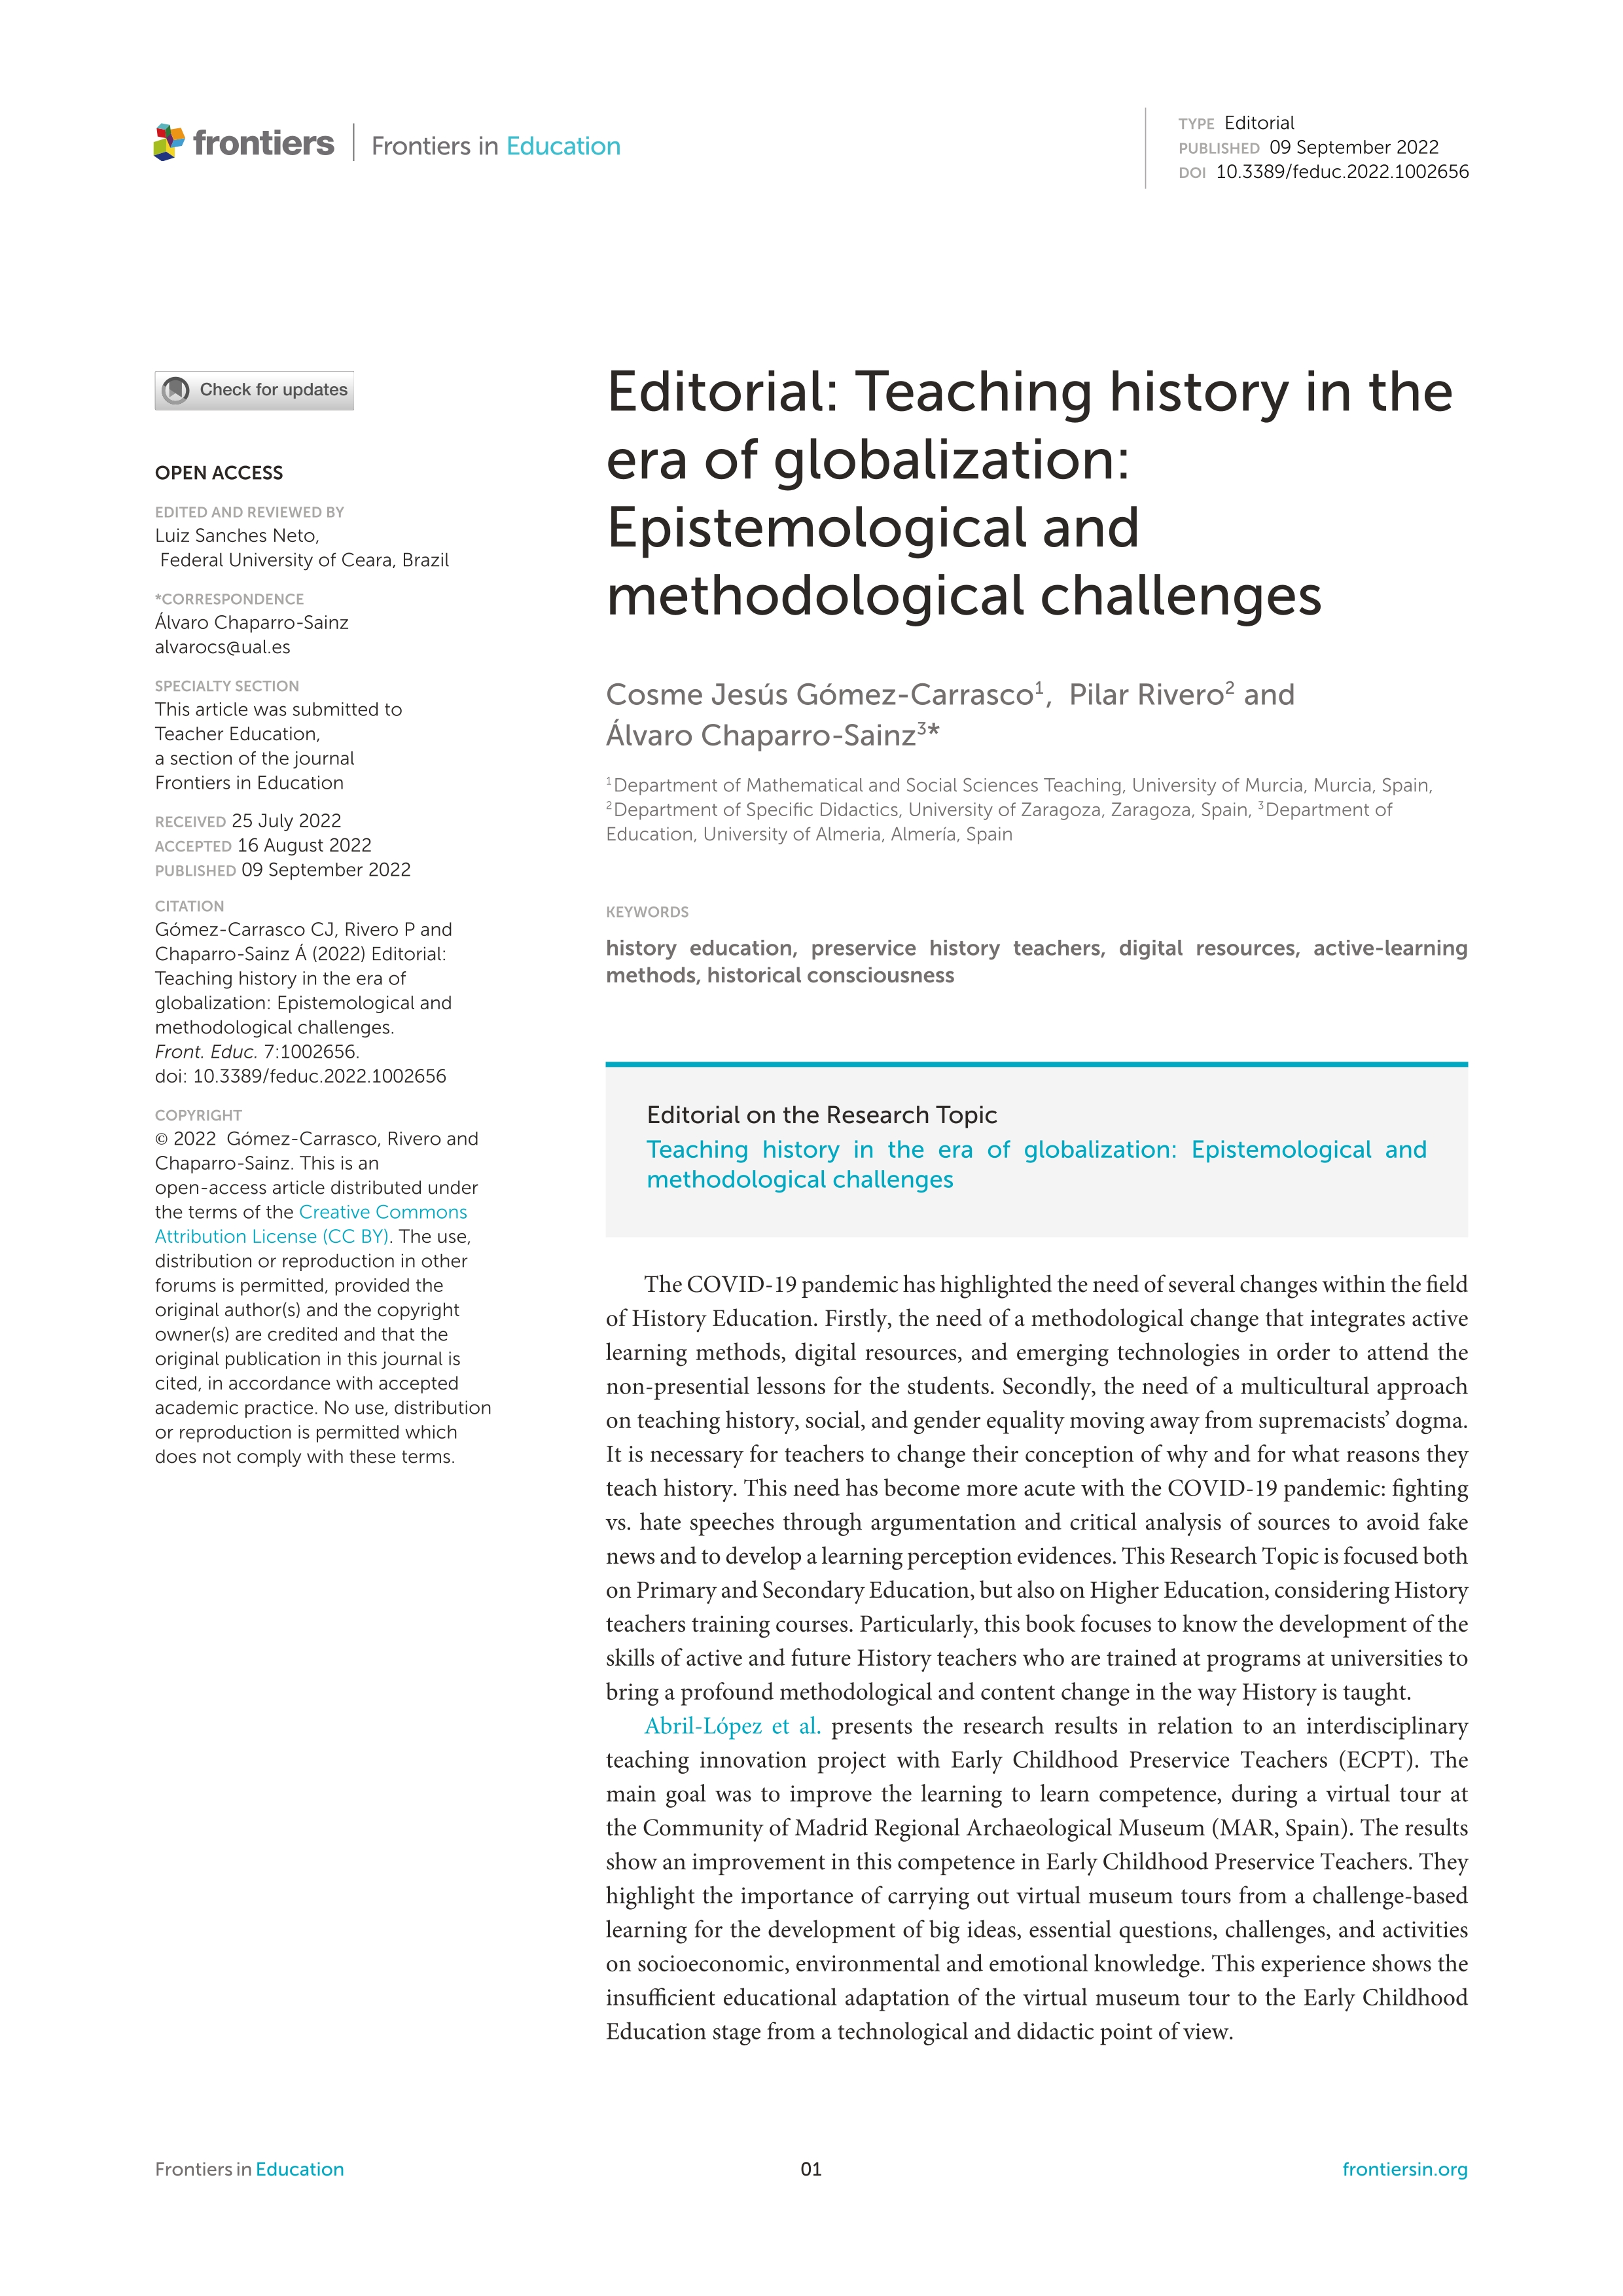 Editorial: Teaching history in the era of globalization: epistemological and methodological challenges